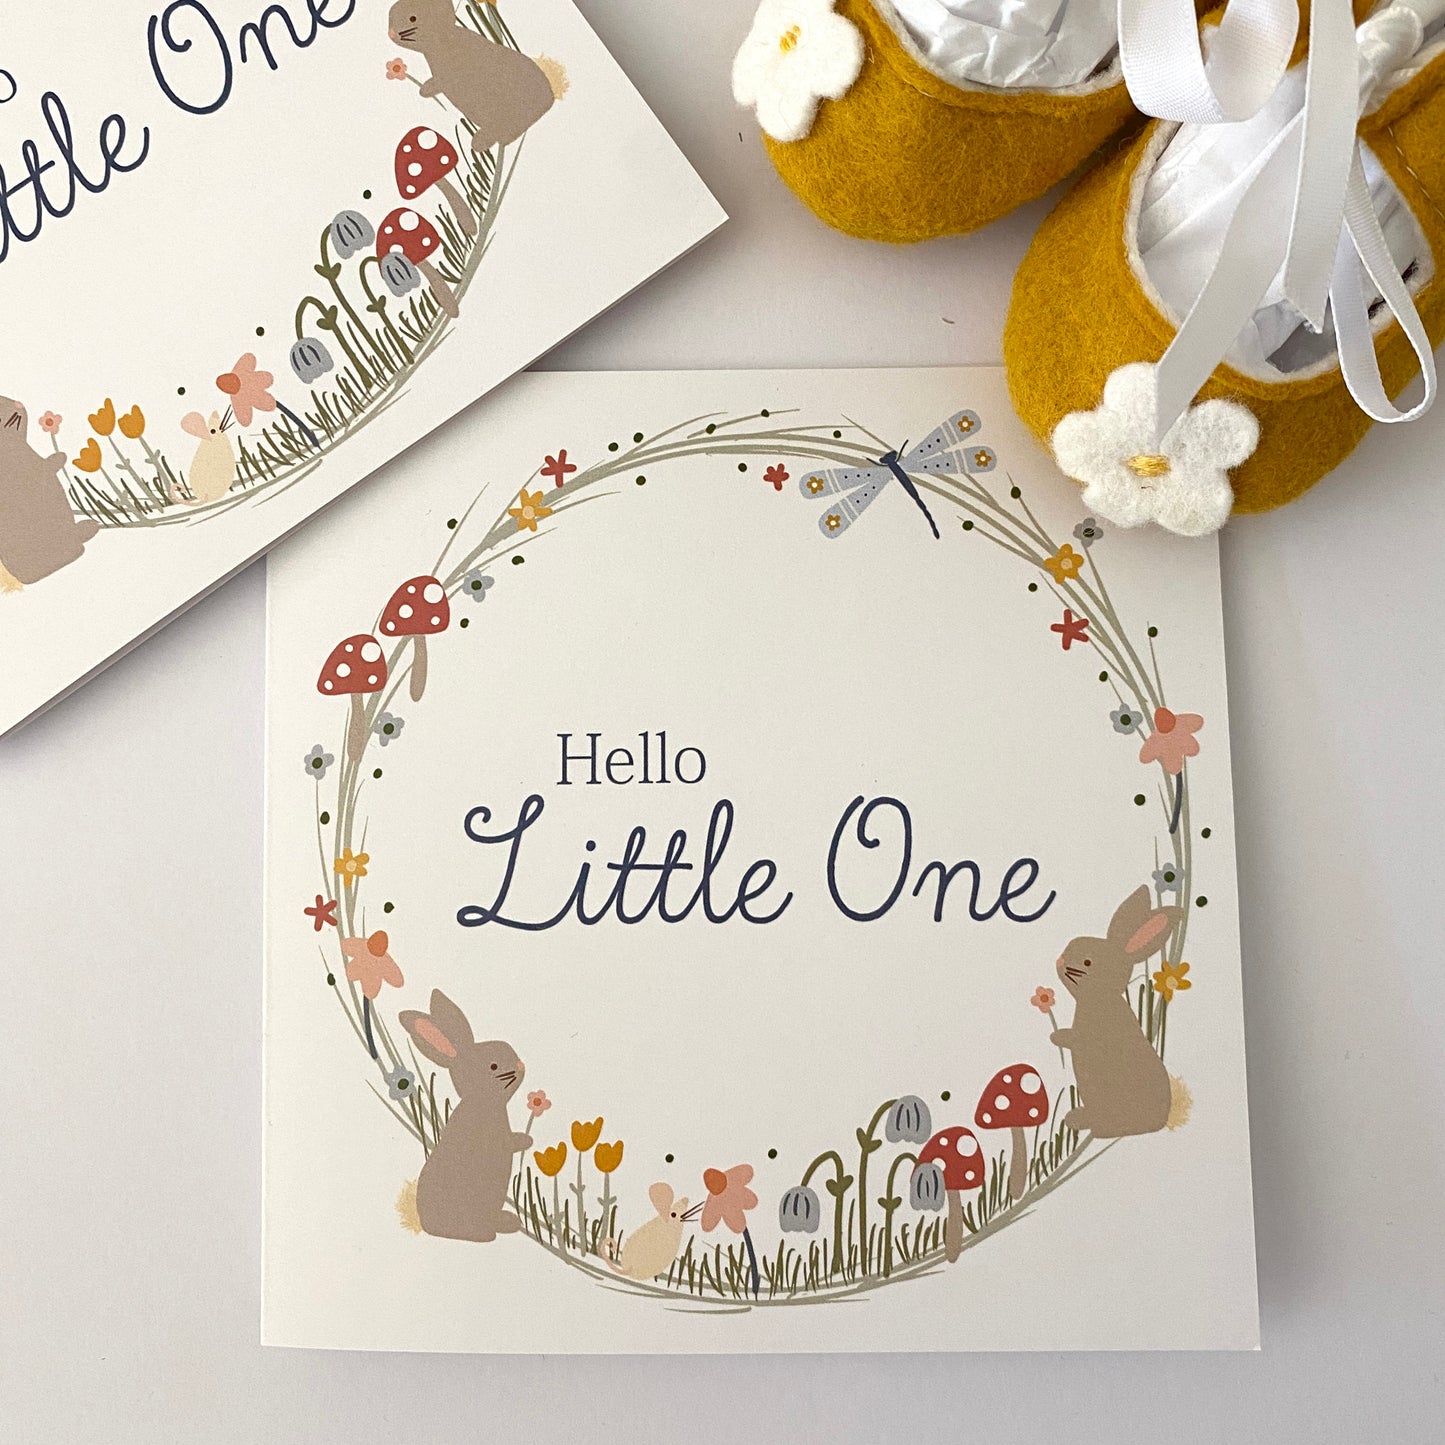 Hello Little One new baby greeting card hand drawn by Kathrin Legg. A beautiful, soft pastel woodland wreath illustratoin featuring small baby rabbits, mushrooms and a dragon fly with the words 'Hello Little One' featured in the centre of the wreath. Photographed by Kathrin Legg with a pari of baby felt shoes.